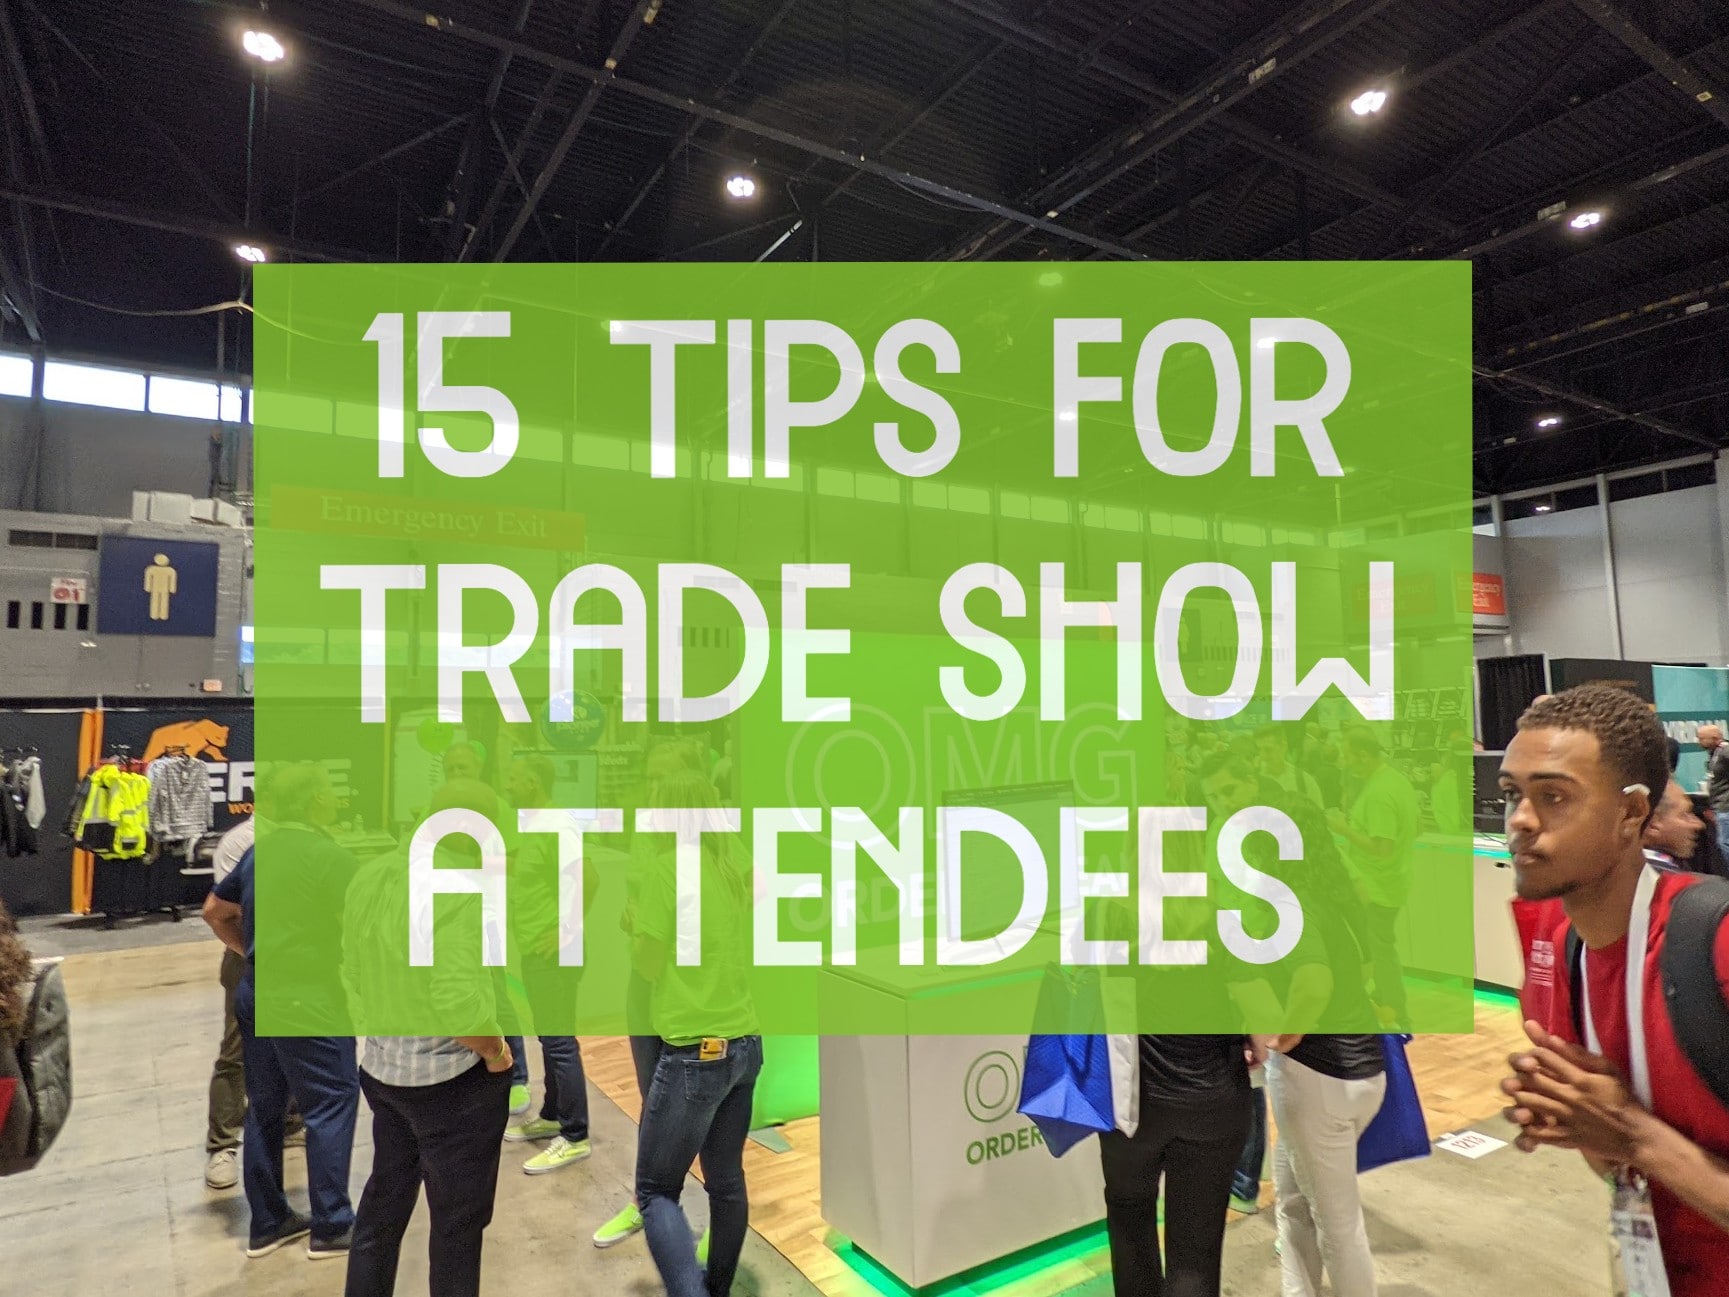 Trade show tips for attendees